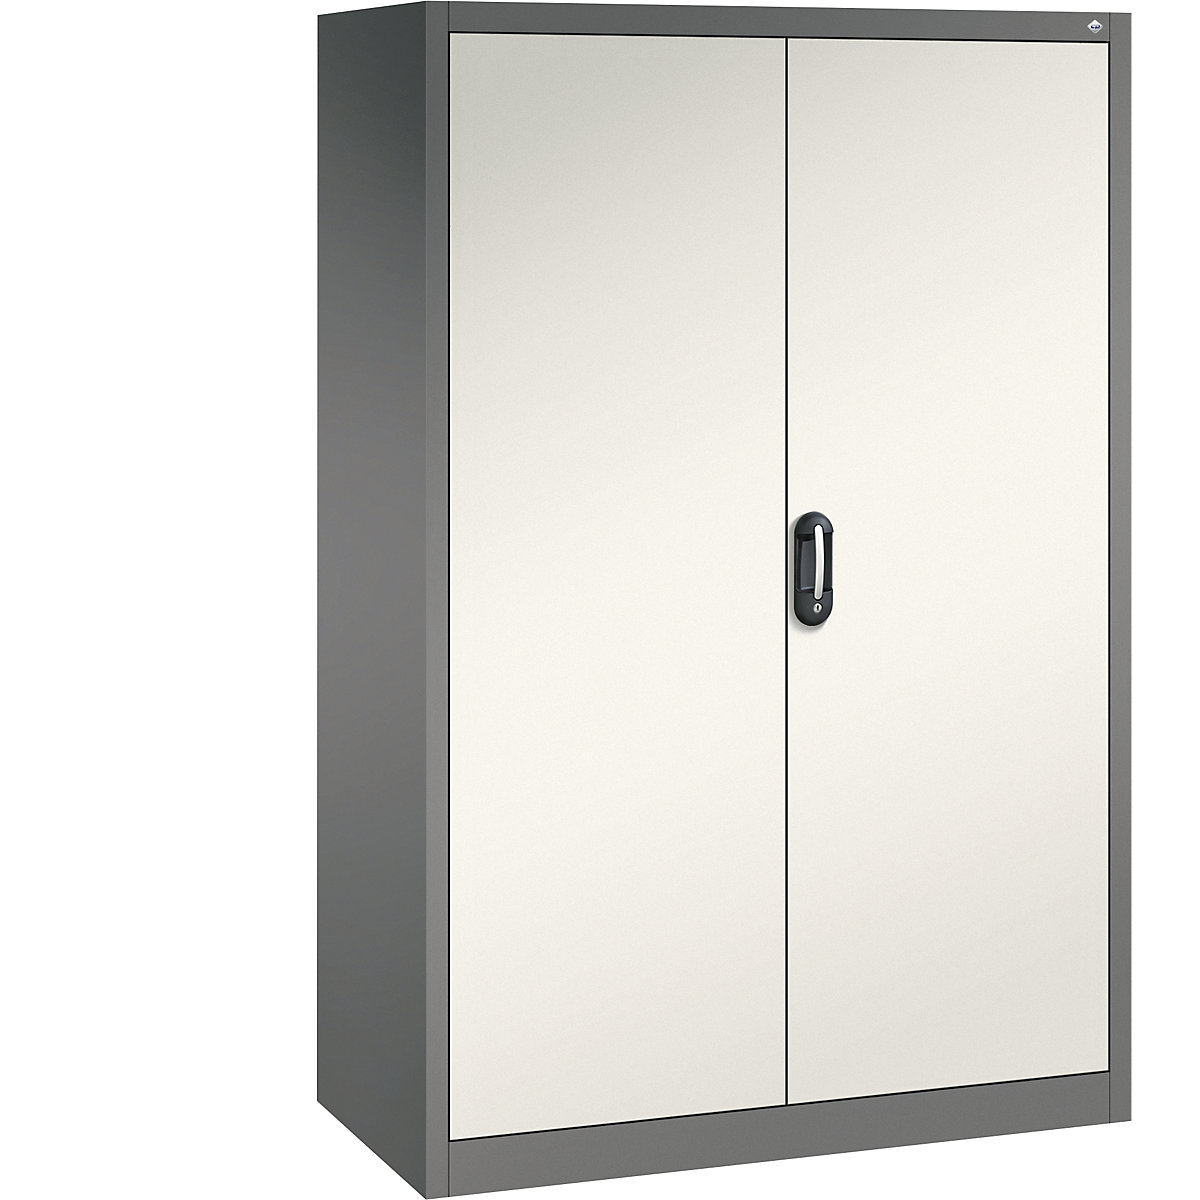 ACURADO universal cupboard – C+P, WxD 1200 x 600 mm, volcanic grey / oyster white-25